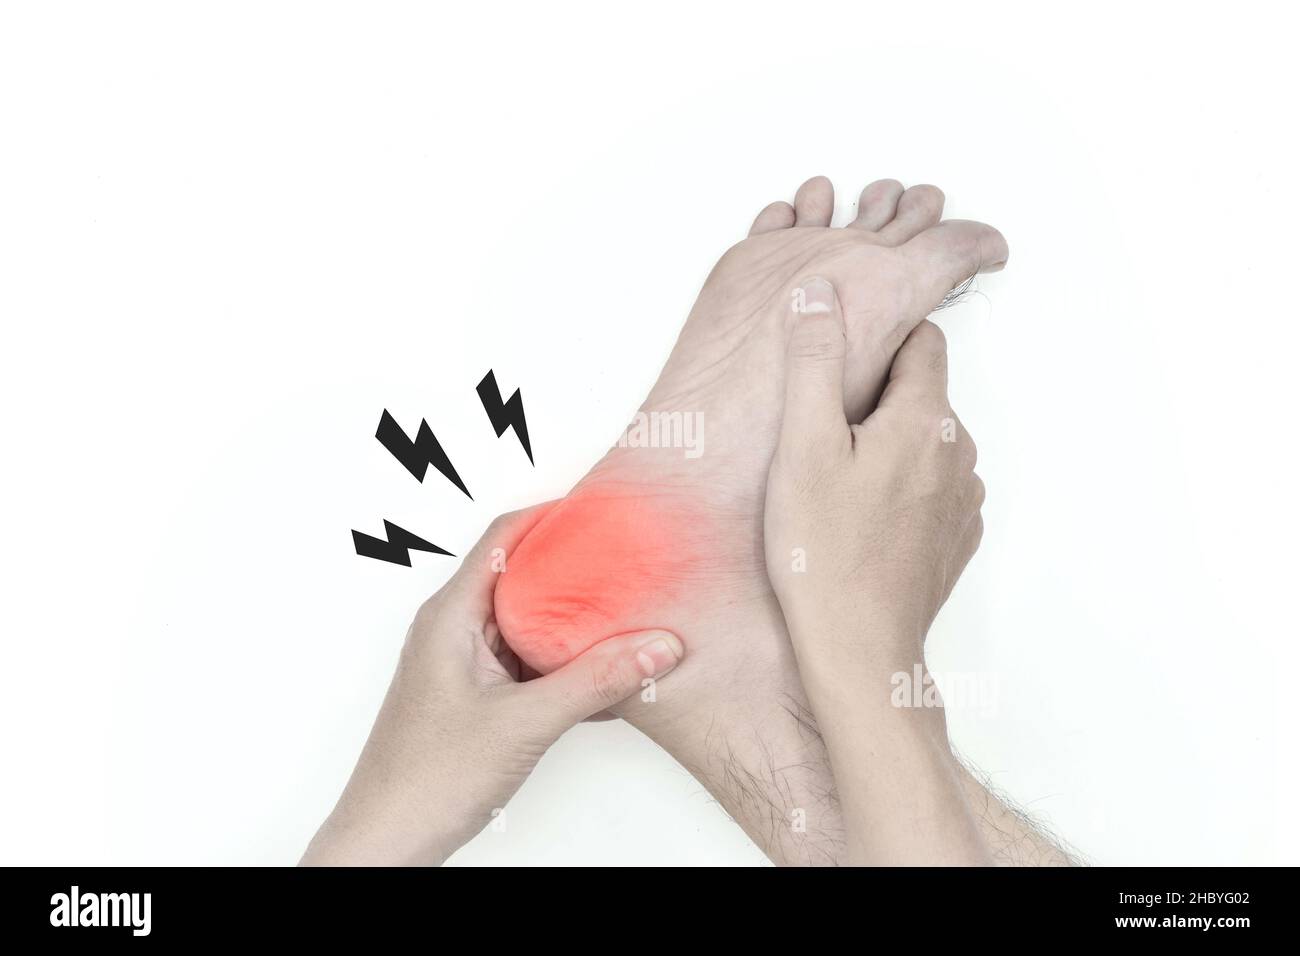 Inflammation in heel of Asian young man. Concept of foot pain, plantar fasciitis, achilles tendonitis or heel spurs. Stock Photo